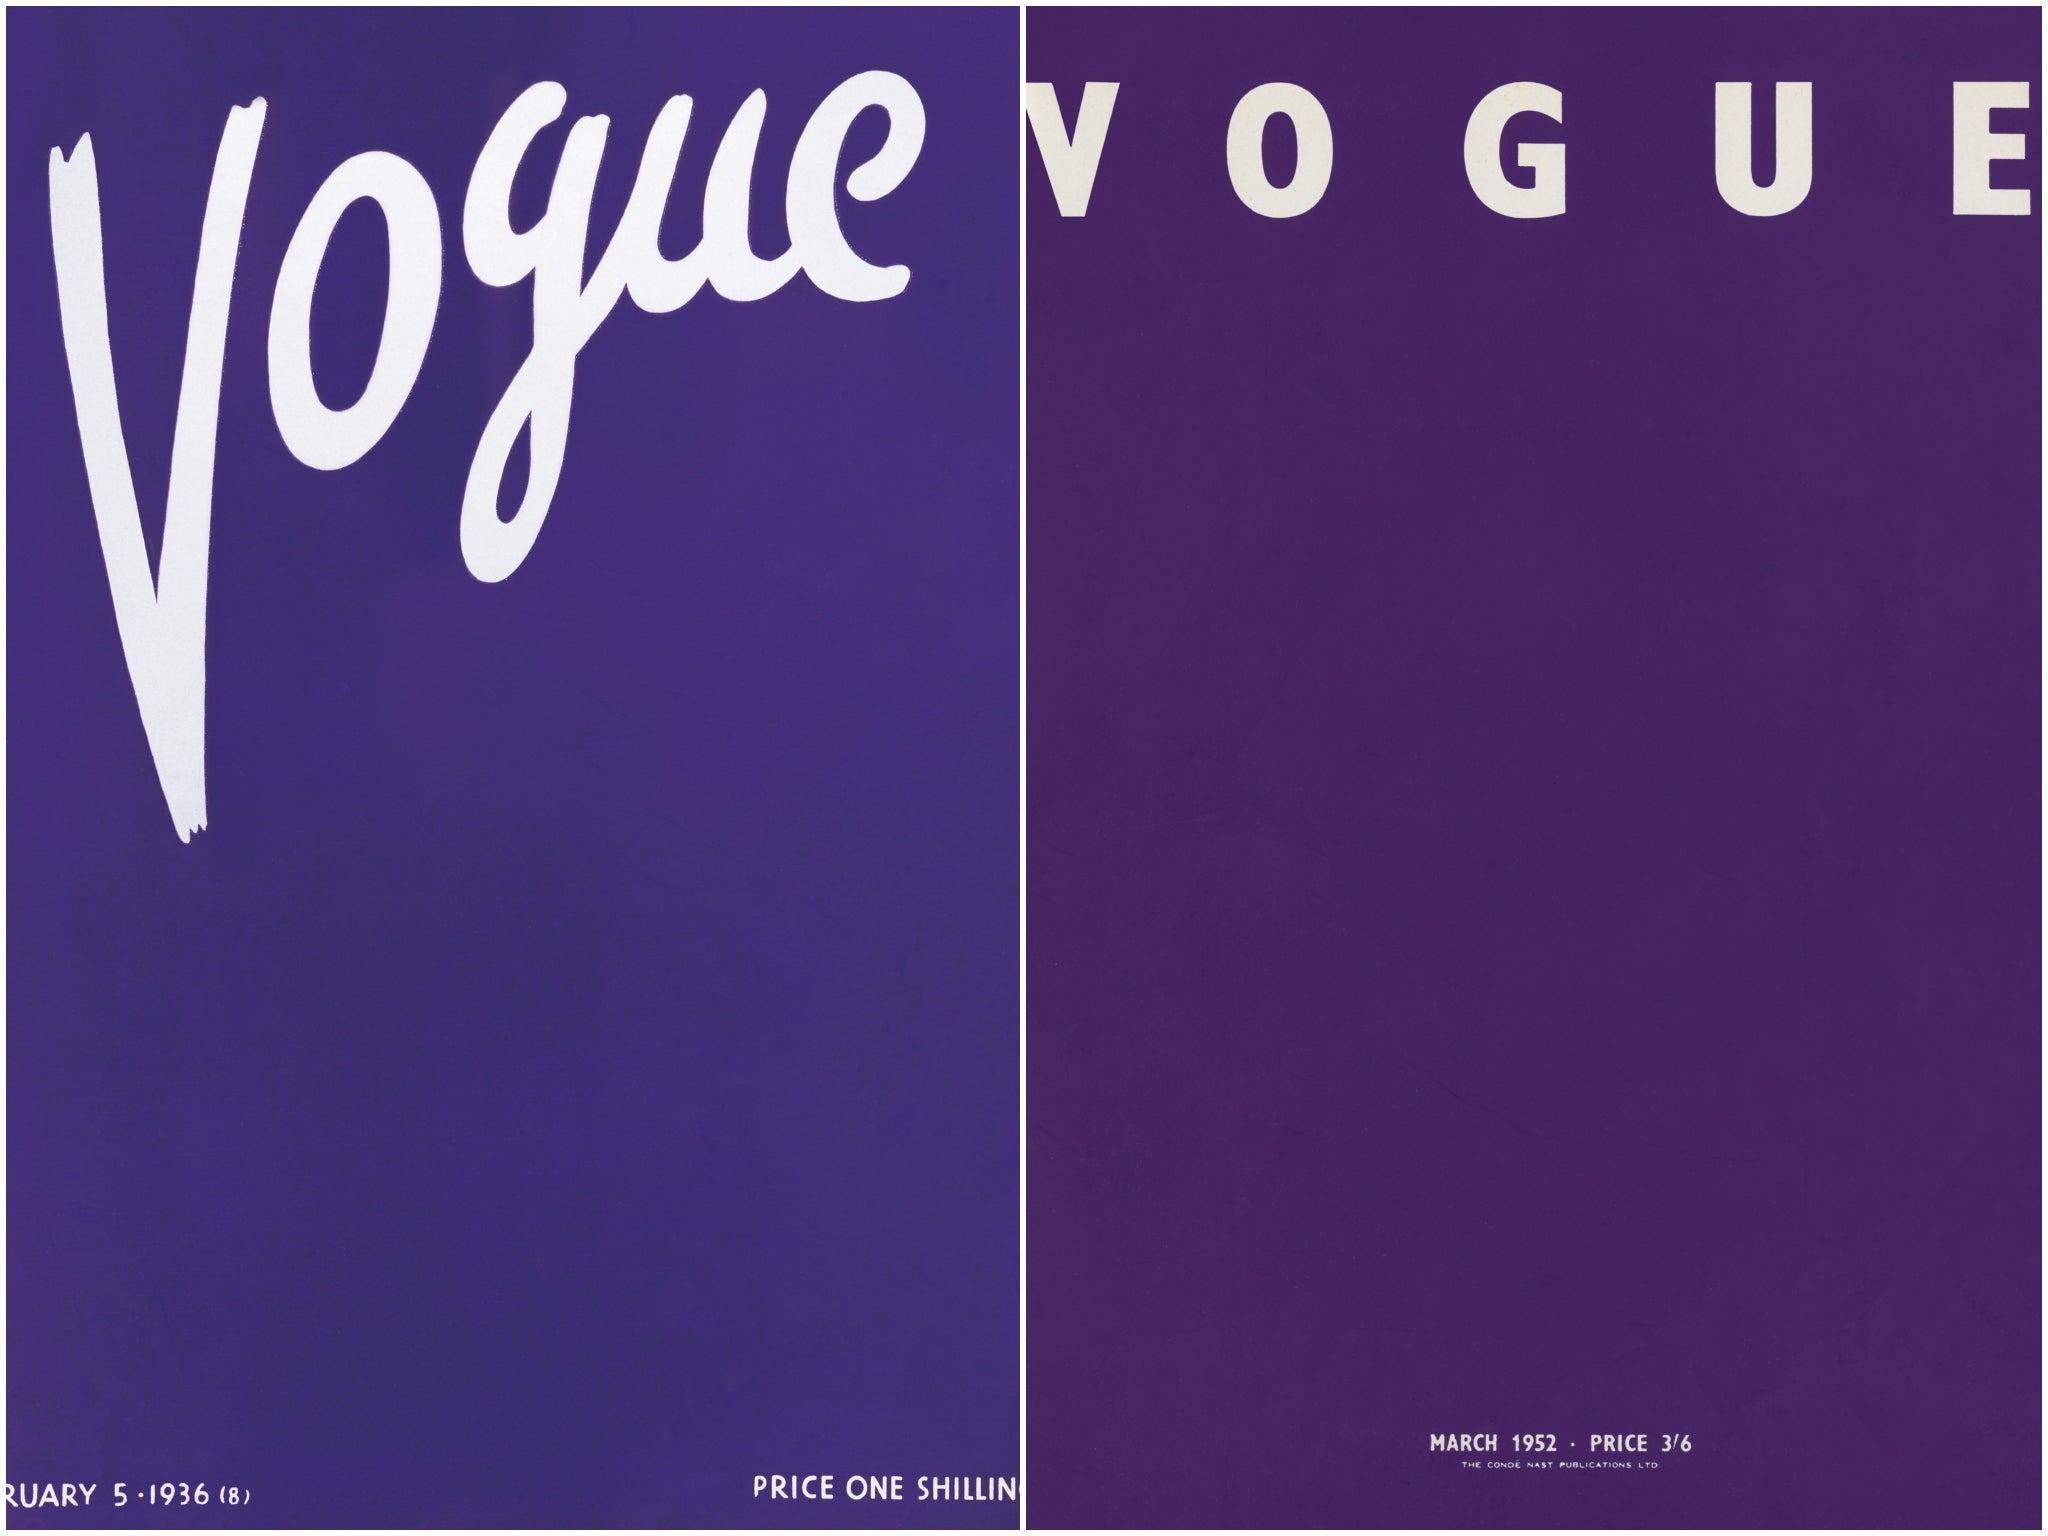 Vogue’s covers from 1936 and 1952 to mark the death of King George V and King George VI respectively